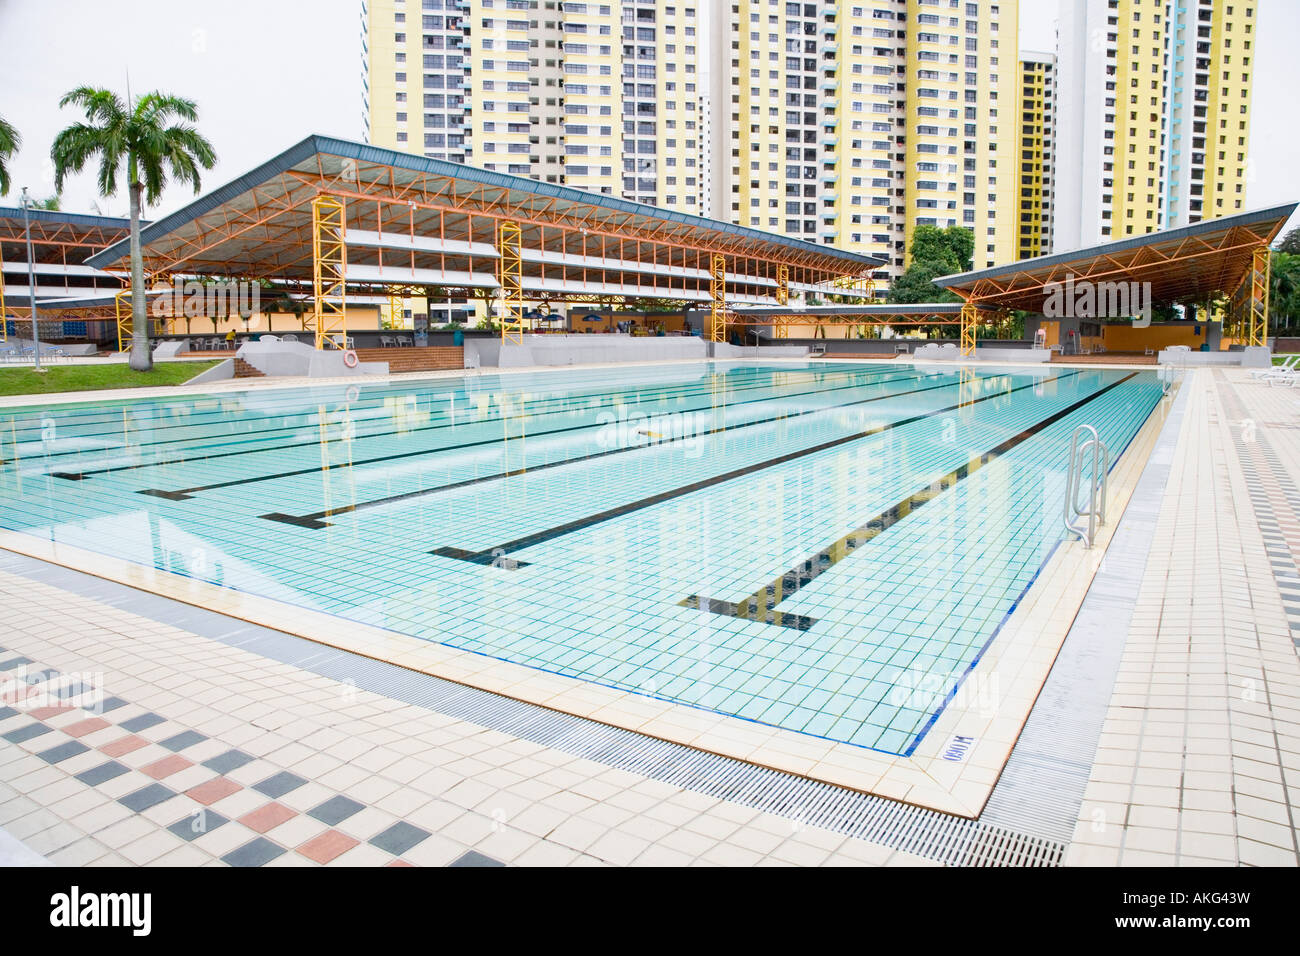 Swimming pool in front of buildings, Clementi Swimming Complex, Clementi, Singapore Stock Photo